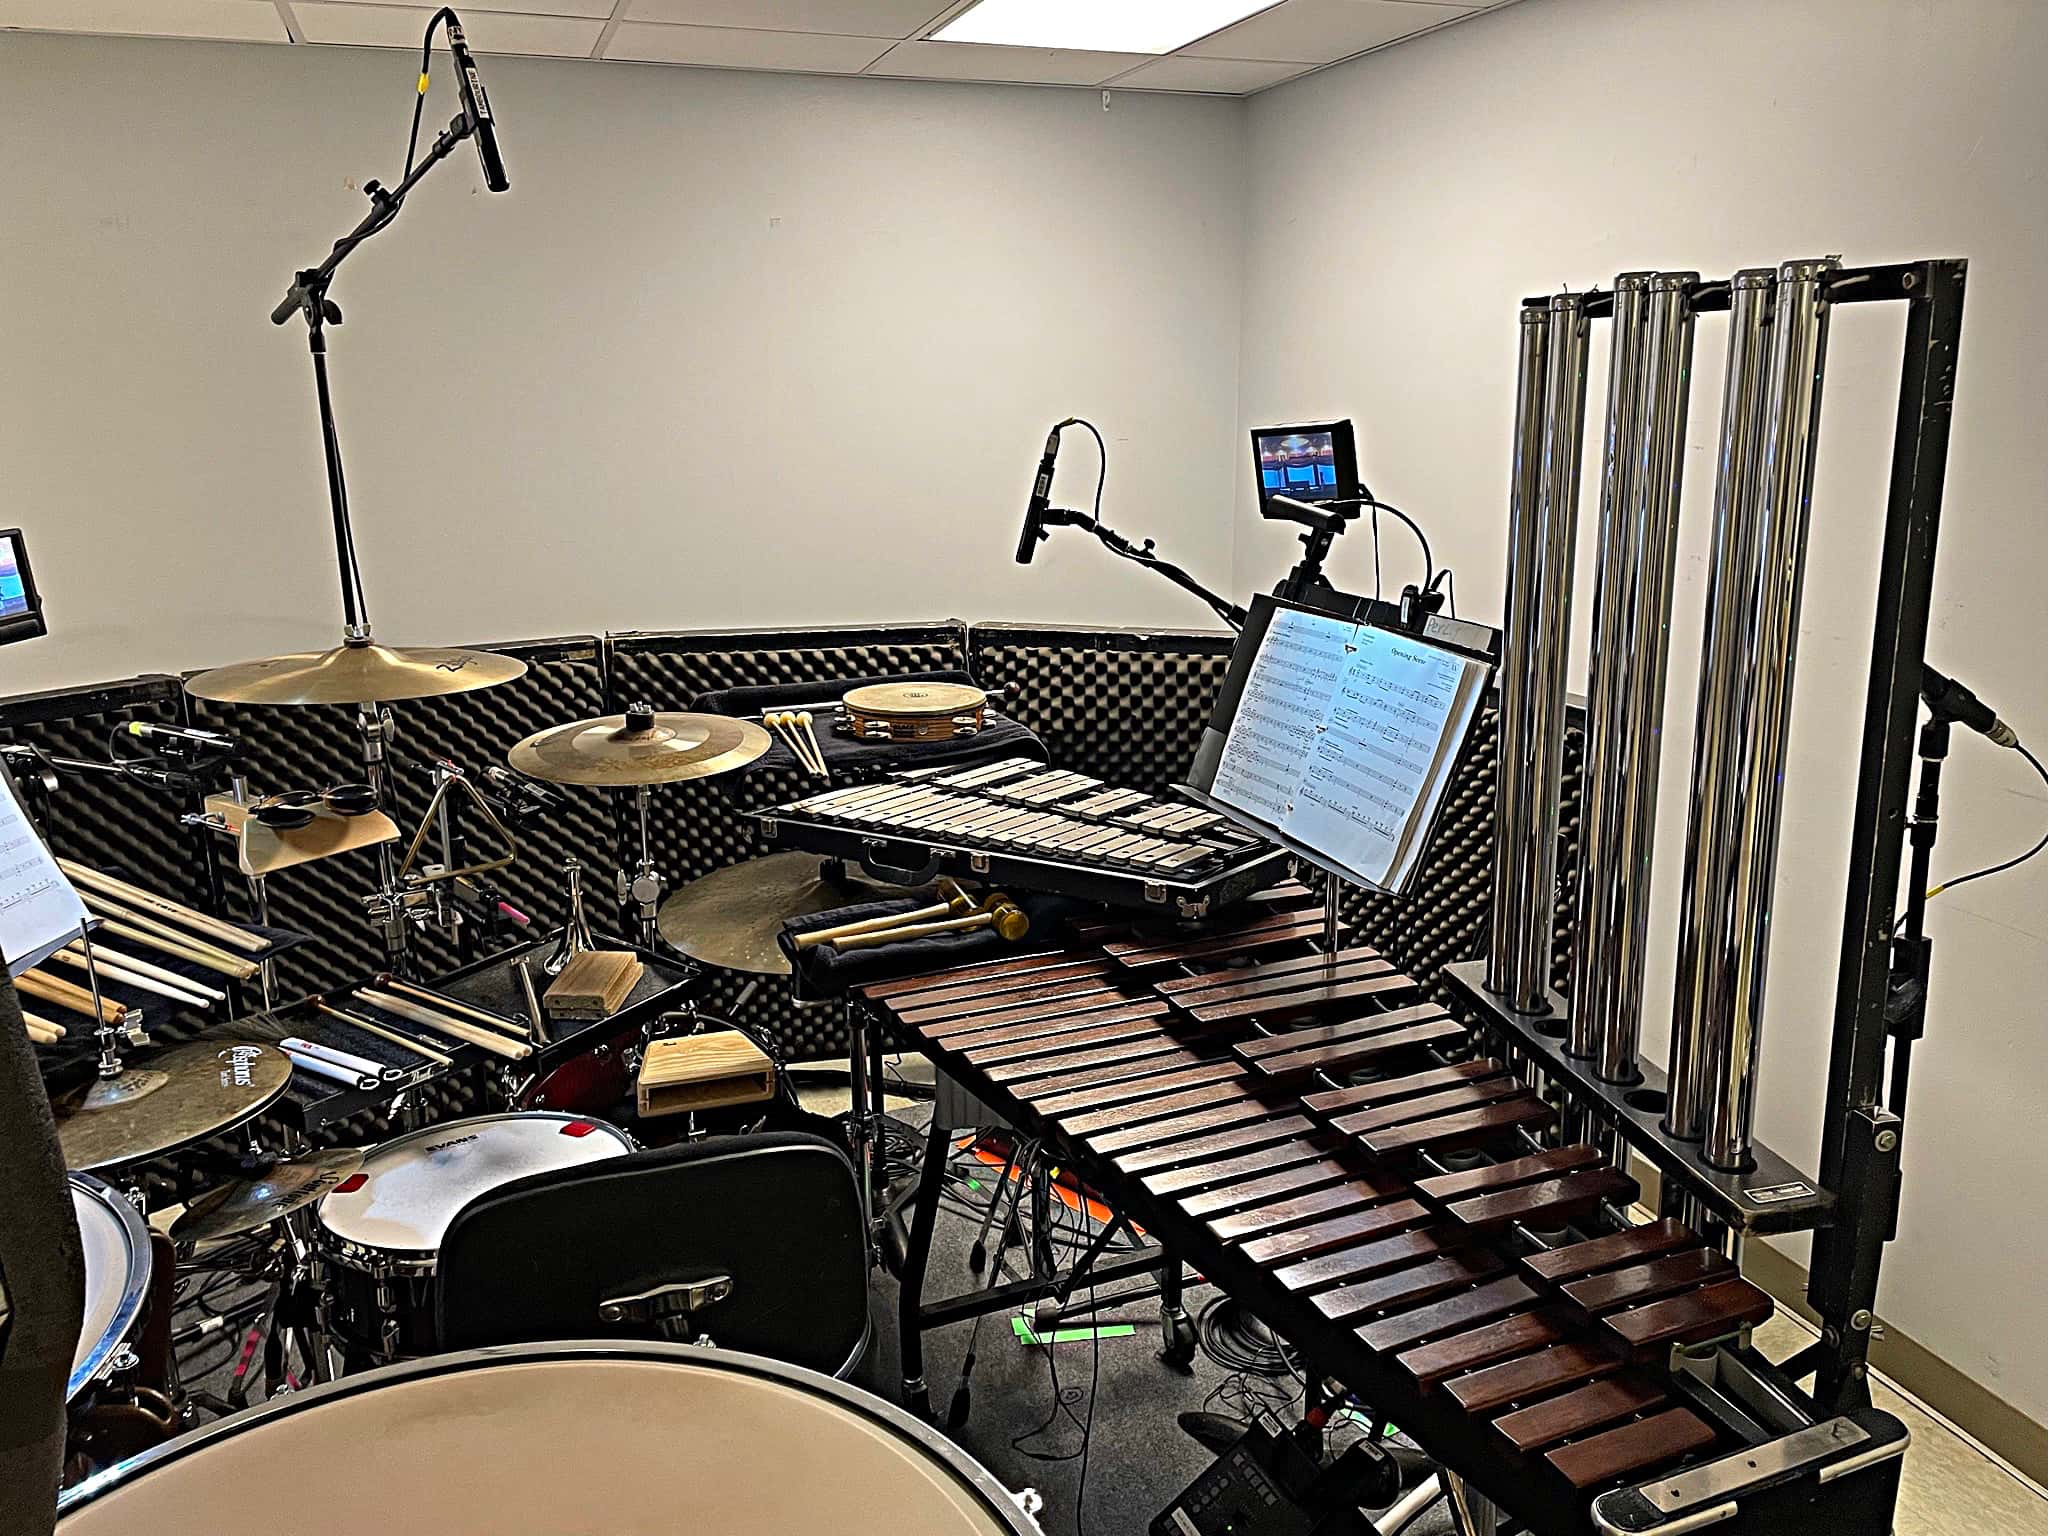 Laura Hamel's drum and percussion setup from the National Tour of My Fair Lady.